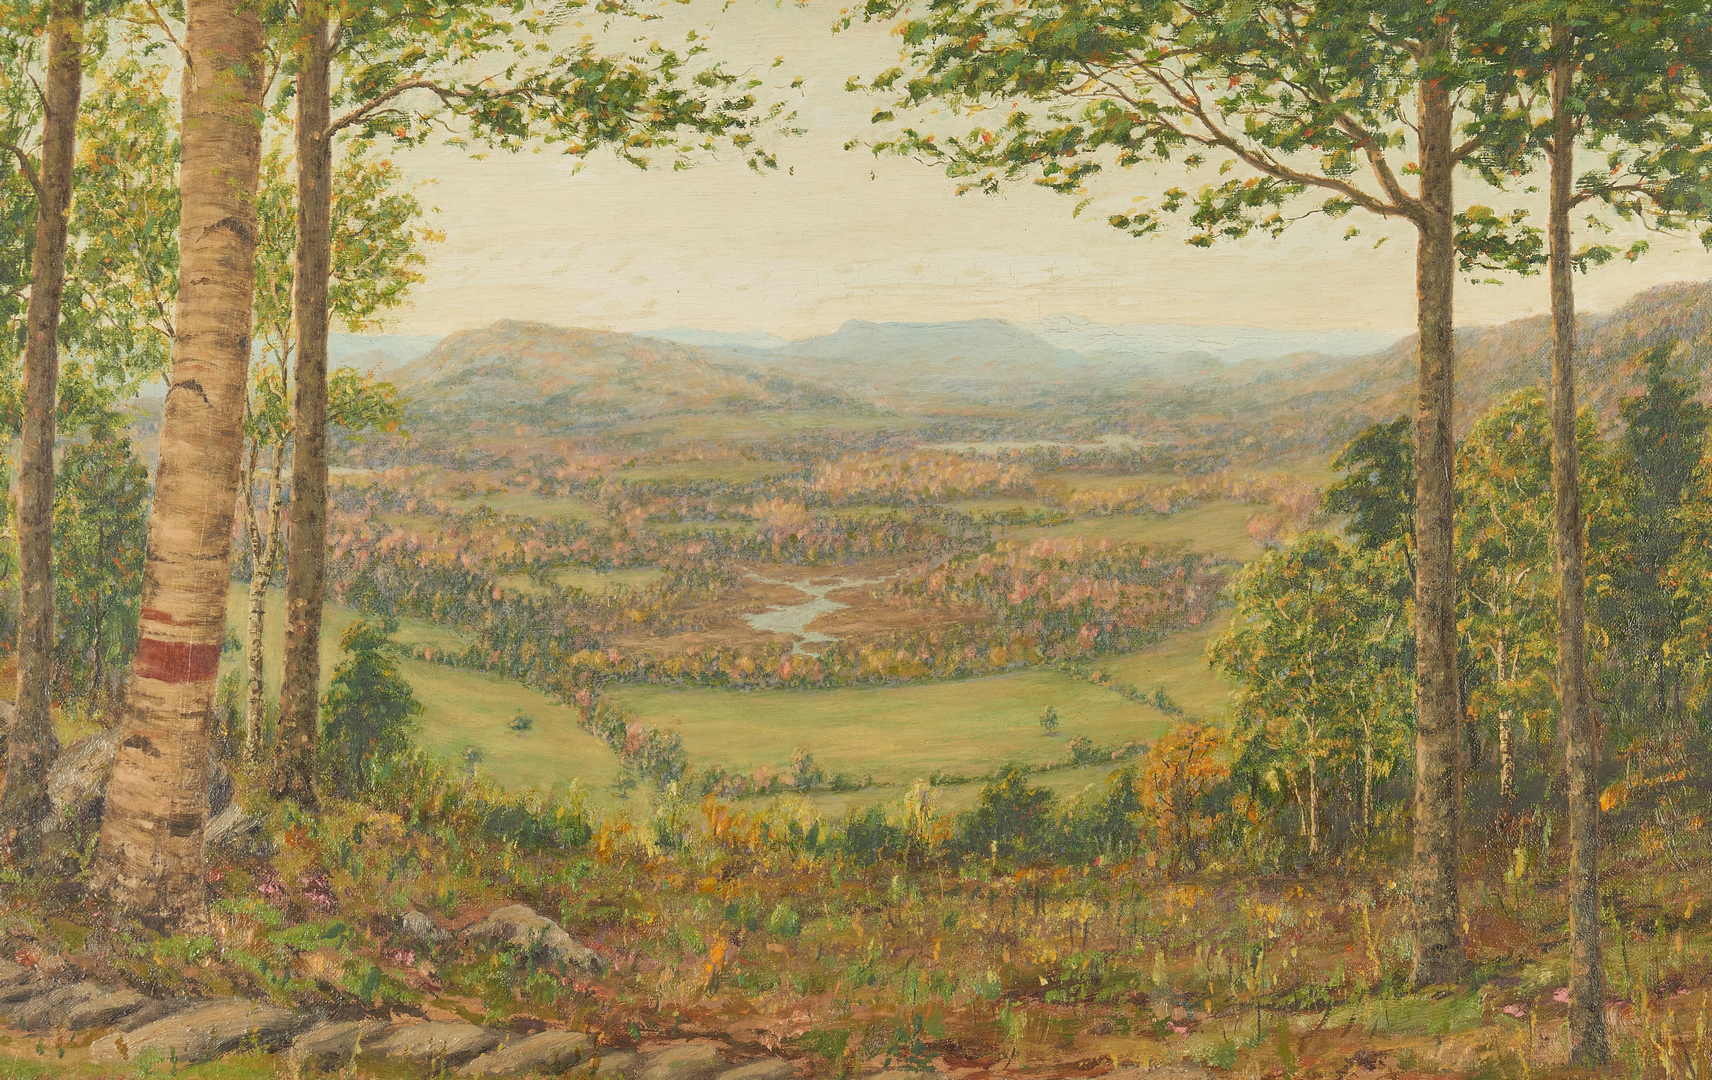 Lot 752: Panoramic Oil on Canvas Landscape, John Earhart